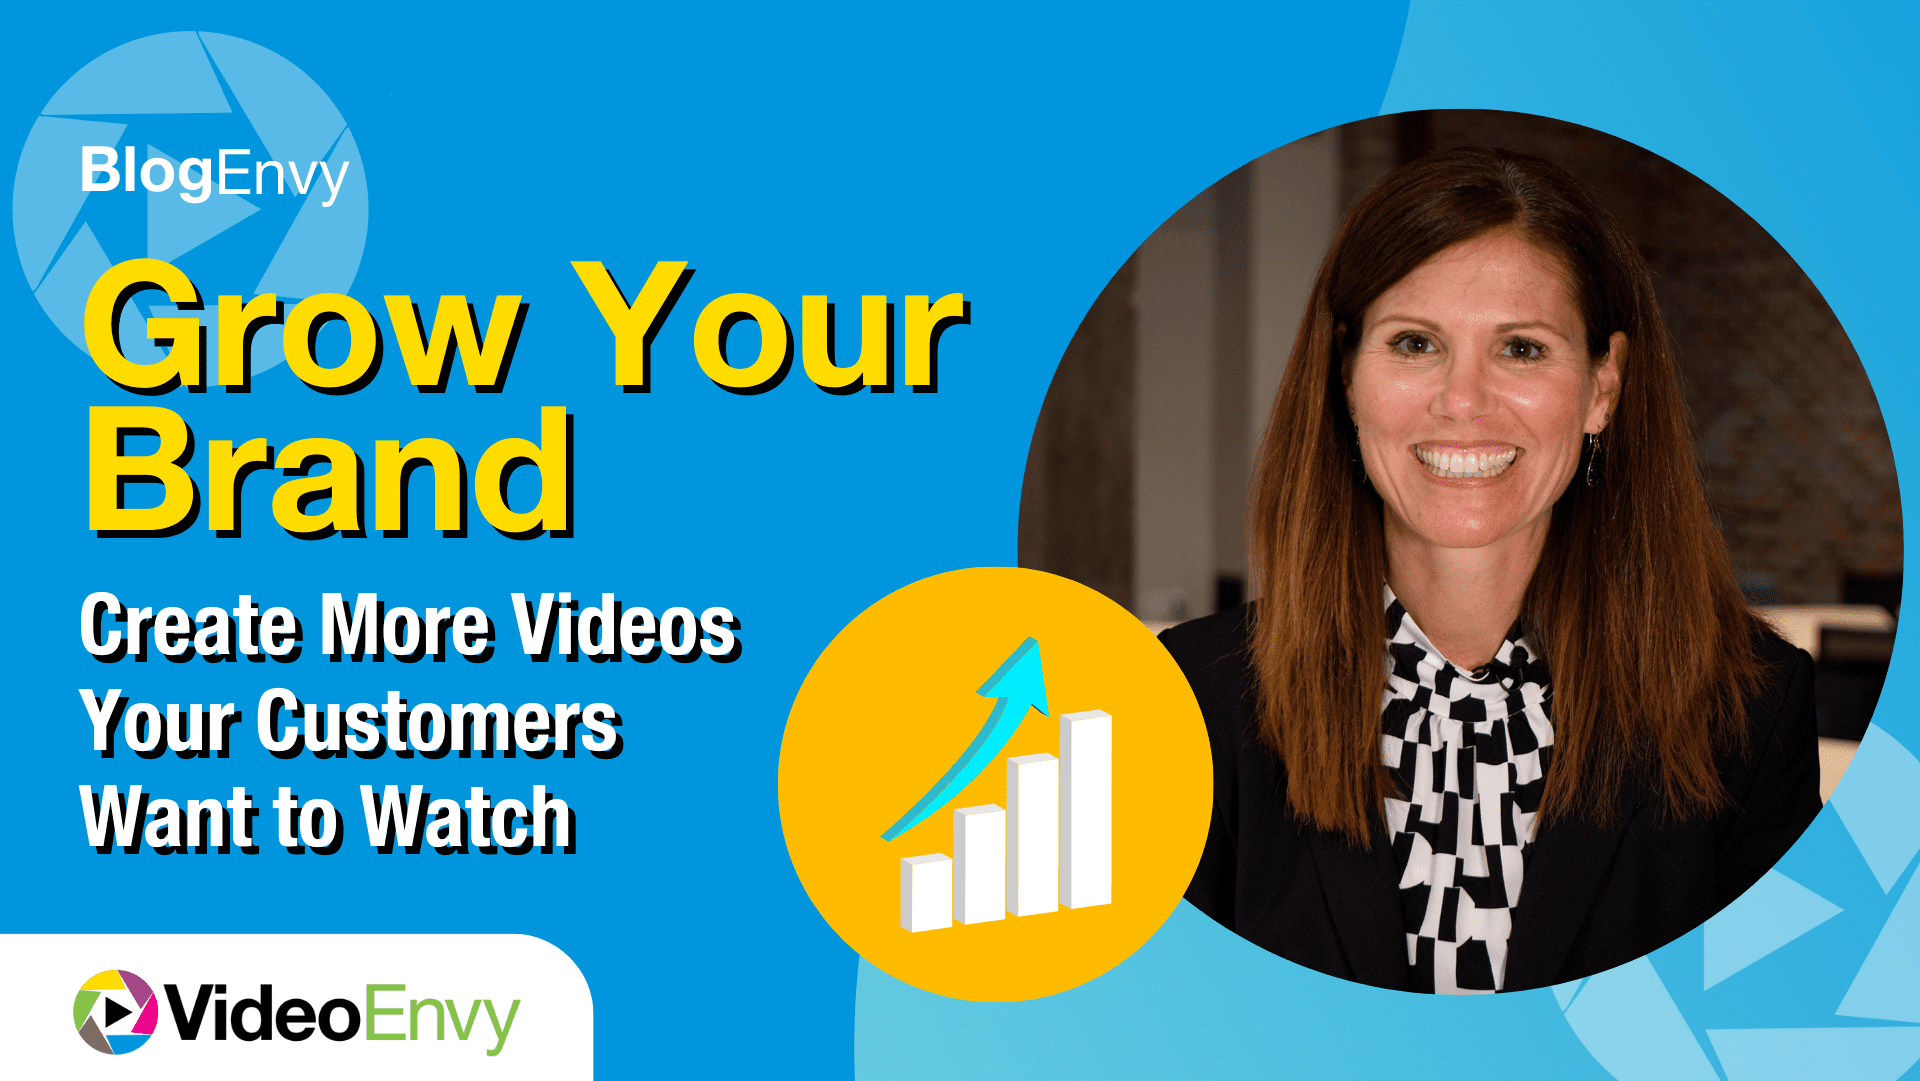 Grow Your Brand with More Videos